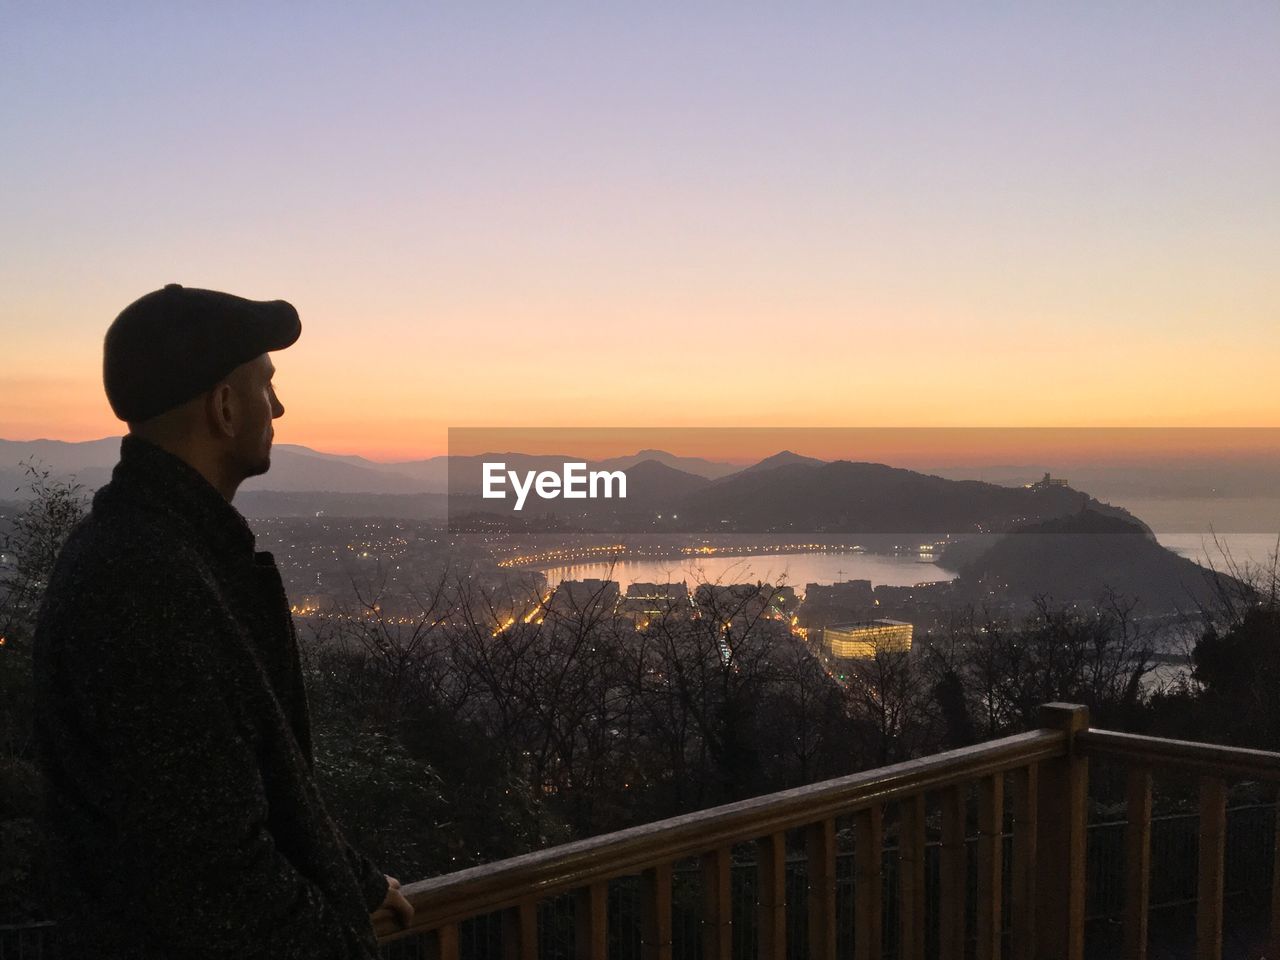 Man looking at scenic view from balcony against sky during sunset